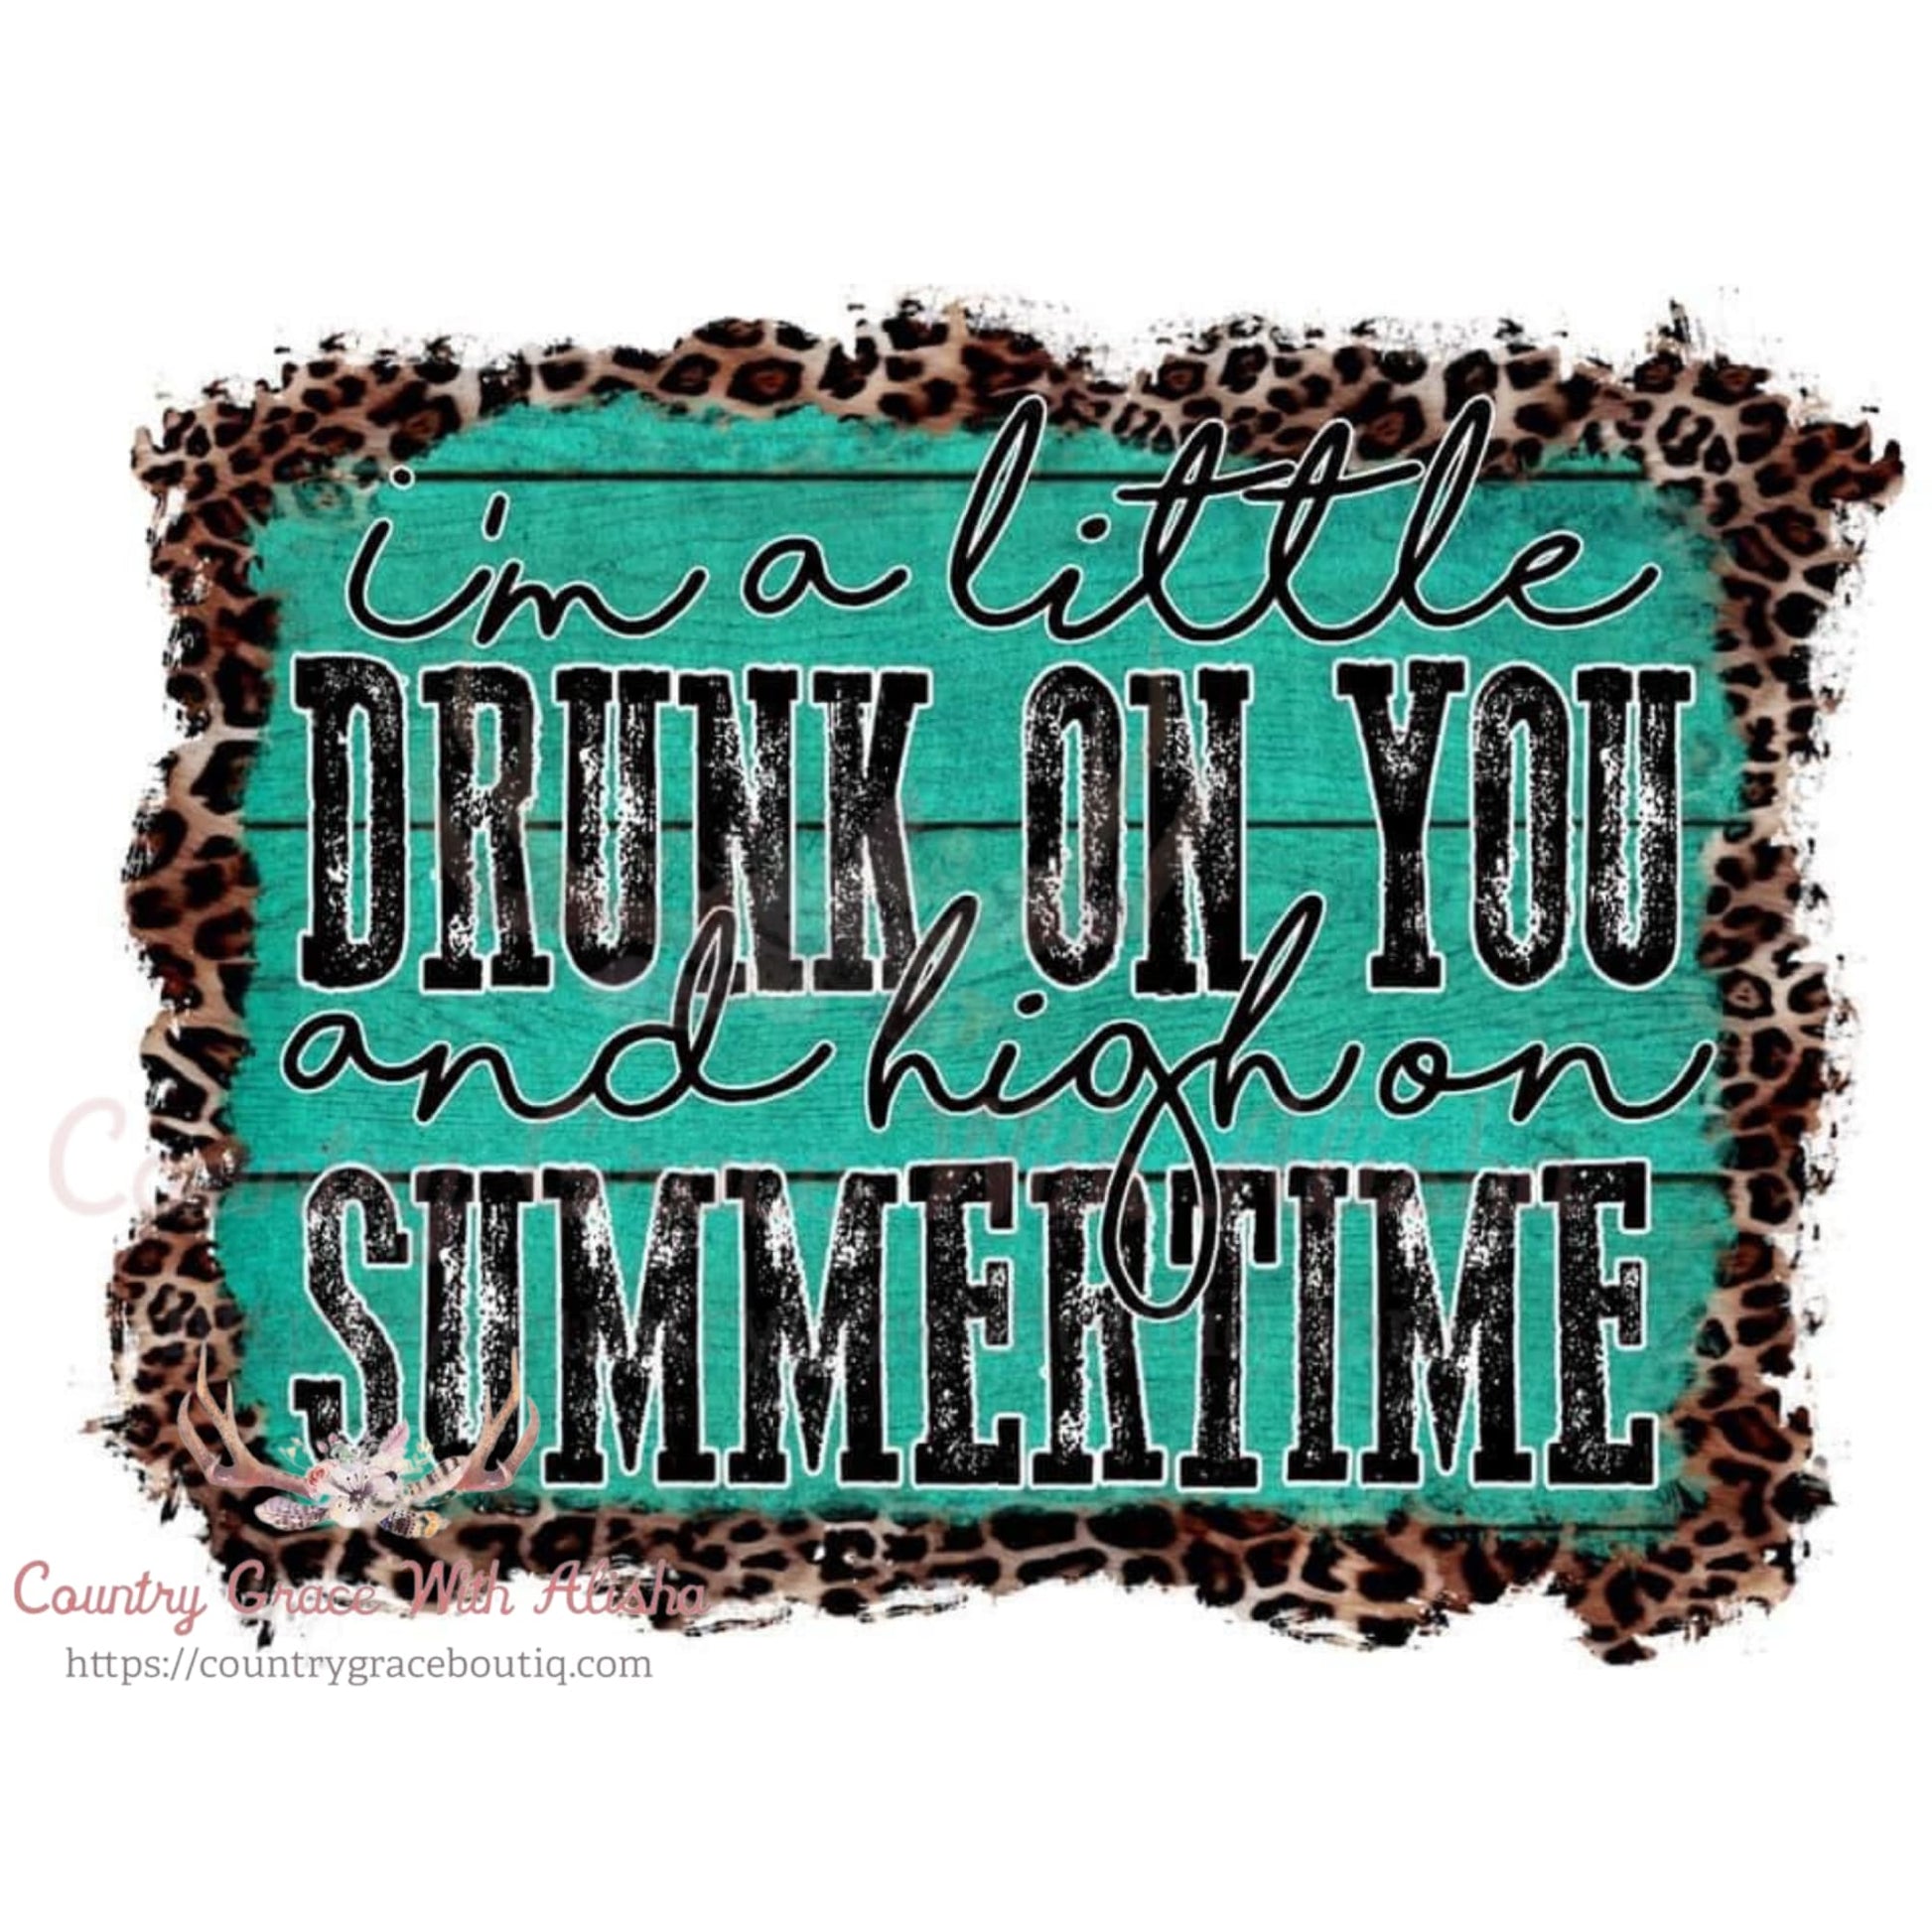 I’m A Little Drunk On You Sublimation Transfer - Sub $1.50 